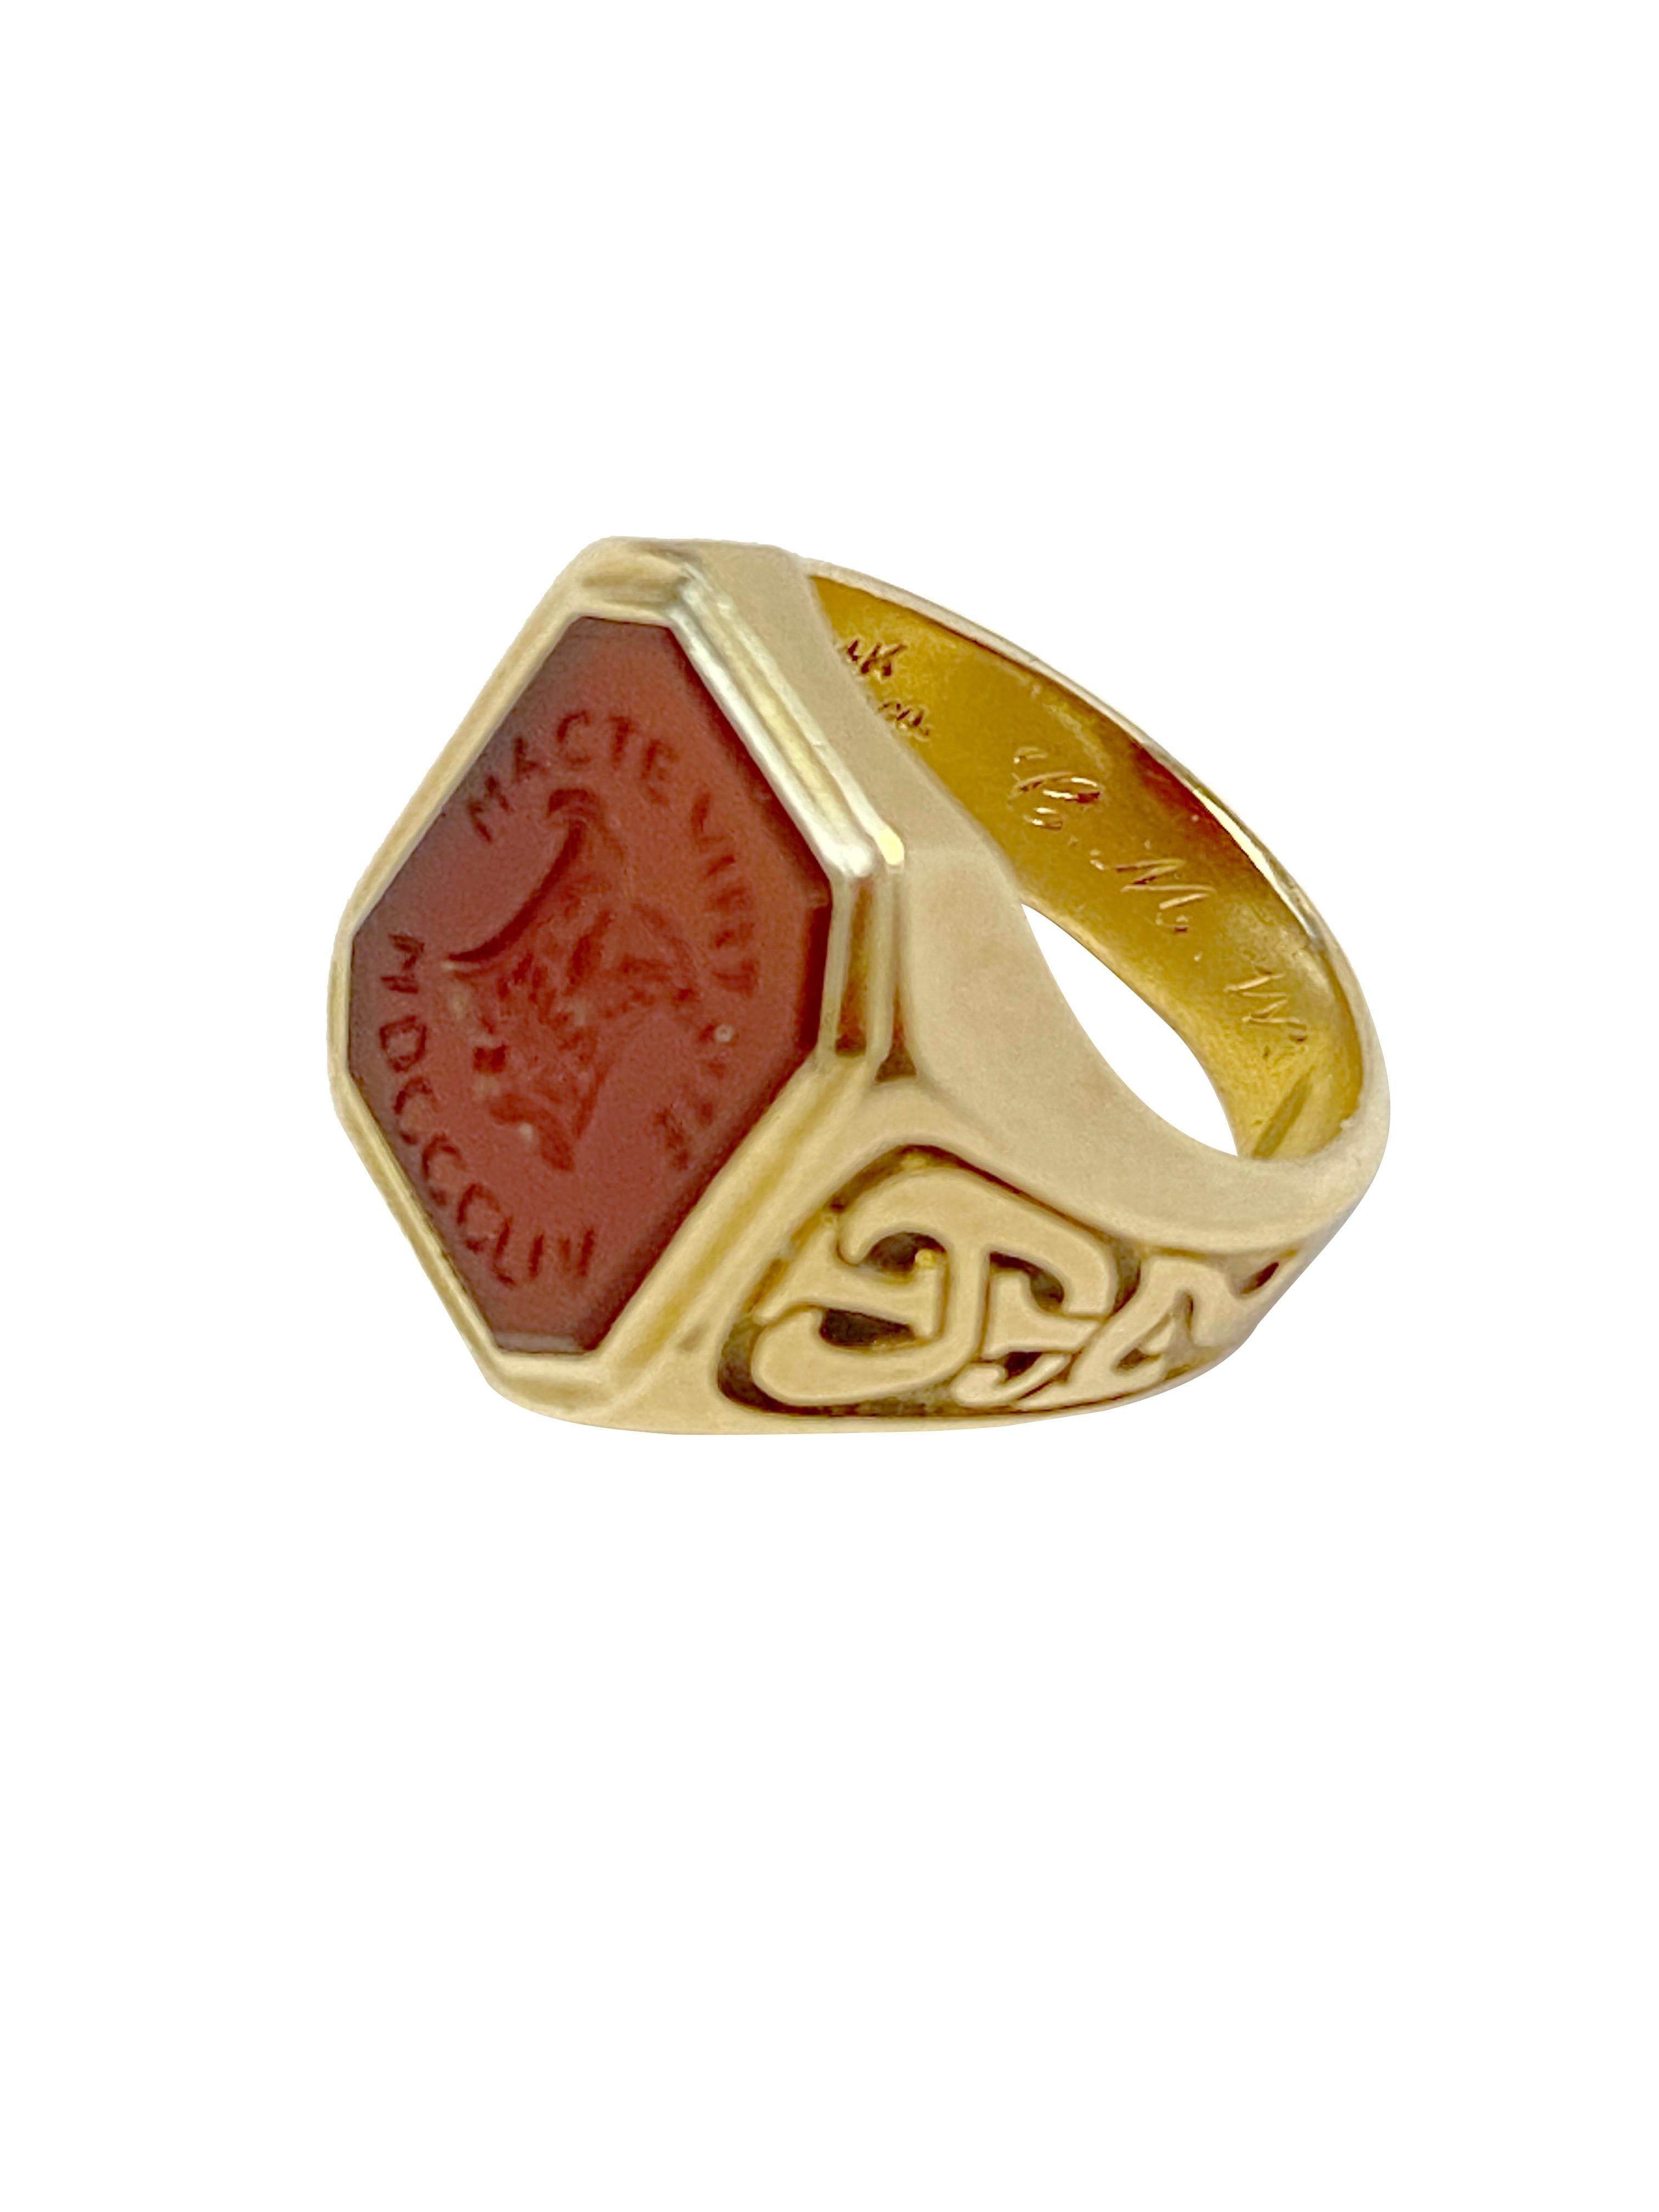 Cabochon Tiffany & Company Antique Yellow Gold Intaglio Crest Signet Ring For Sale